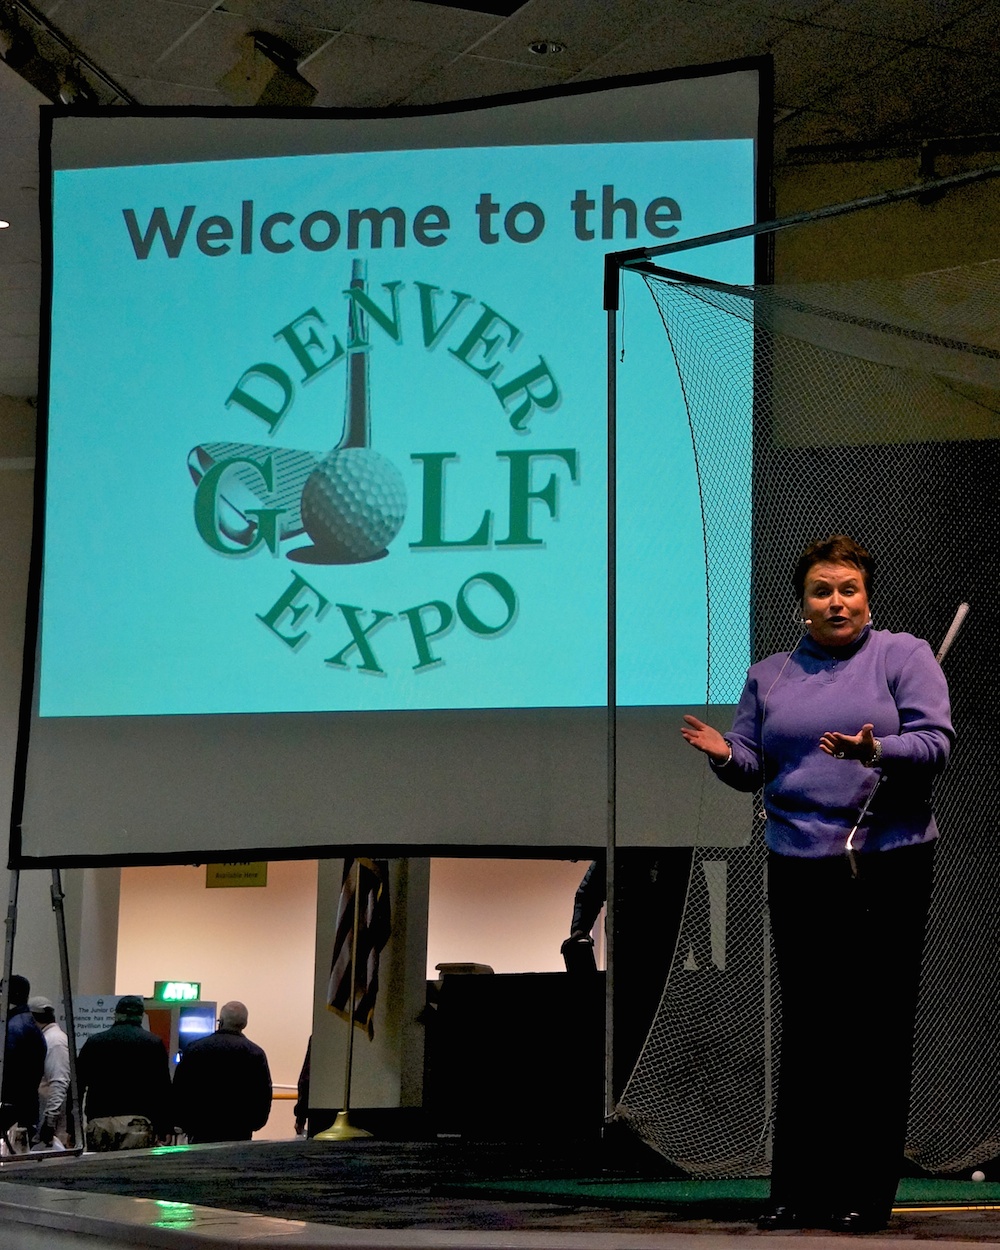 The Denver Golf Expo offers everything golf from pro seminars to truckloads of equipment and golf clubs for sale, to show-only deals and golf getaways!